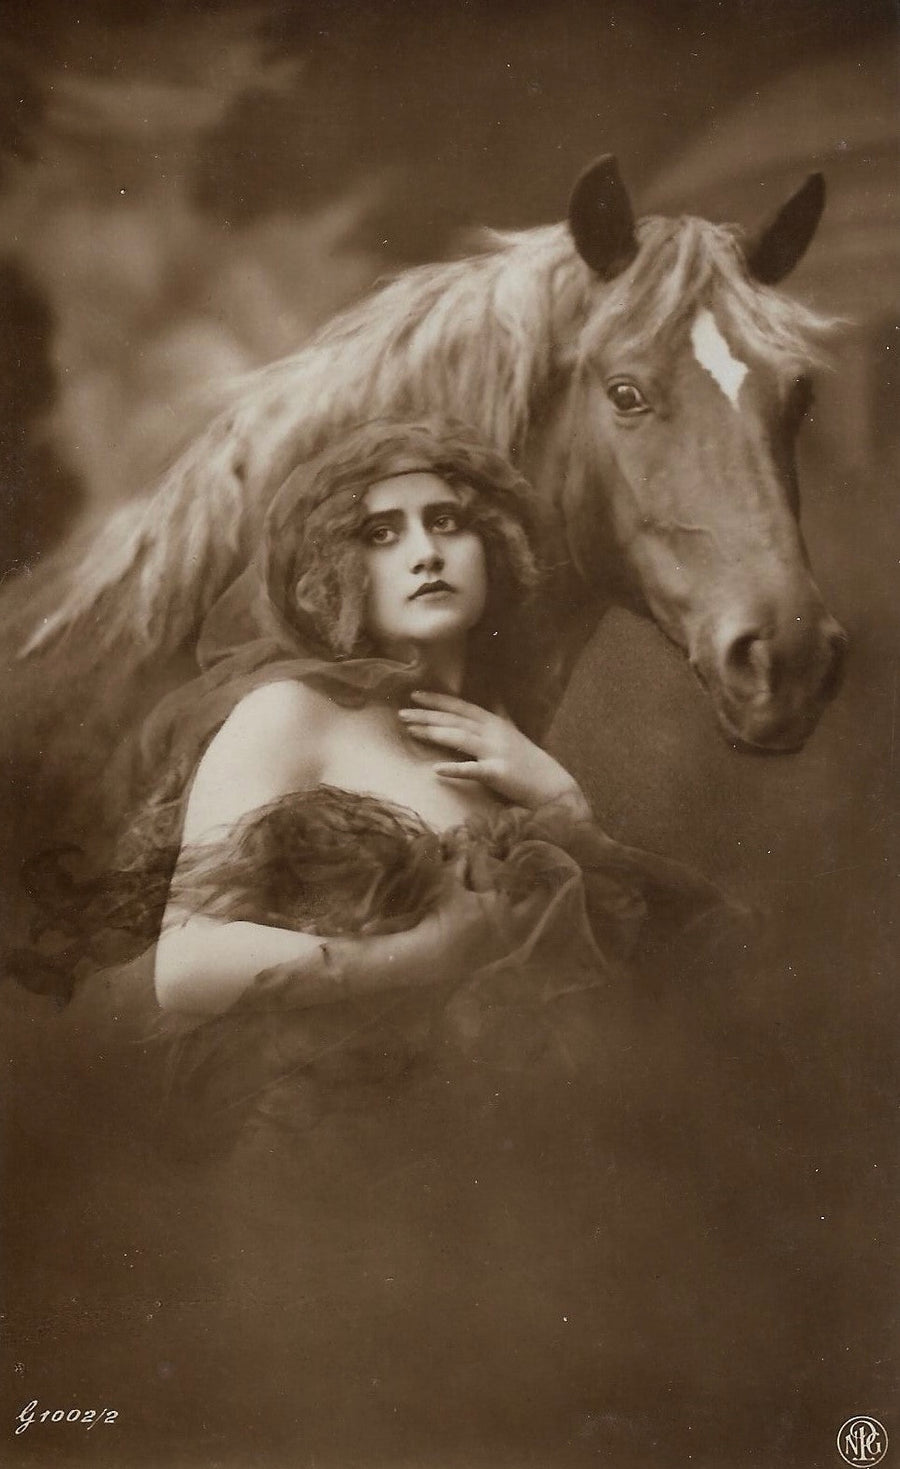 Veiled Woman with Horse - 1910s RPPC